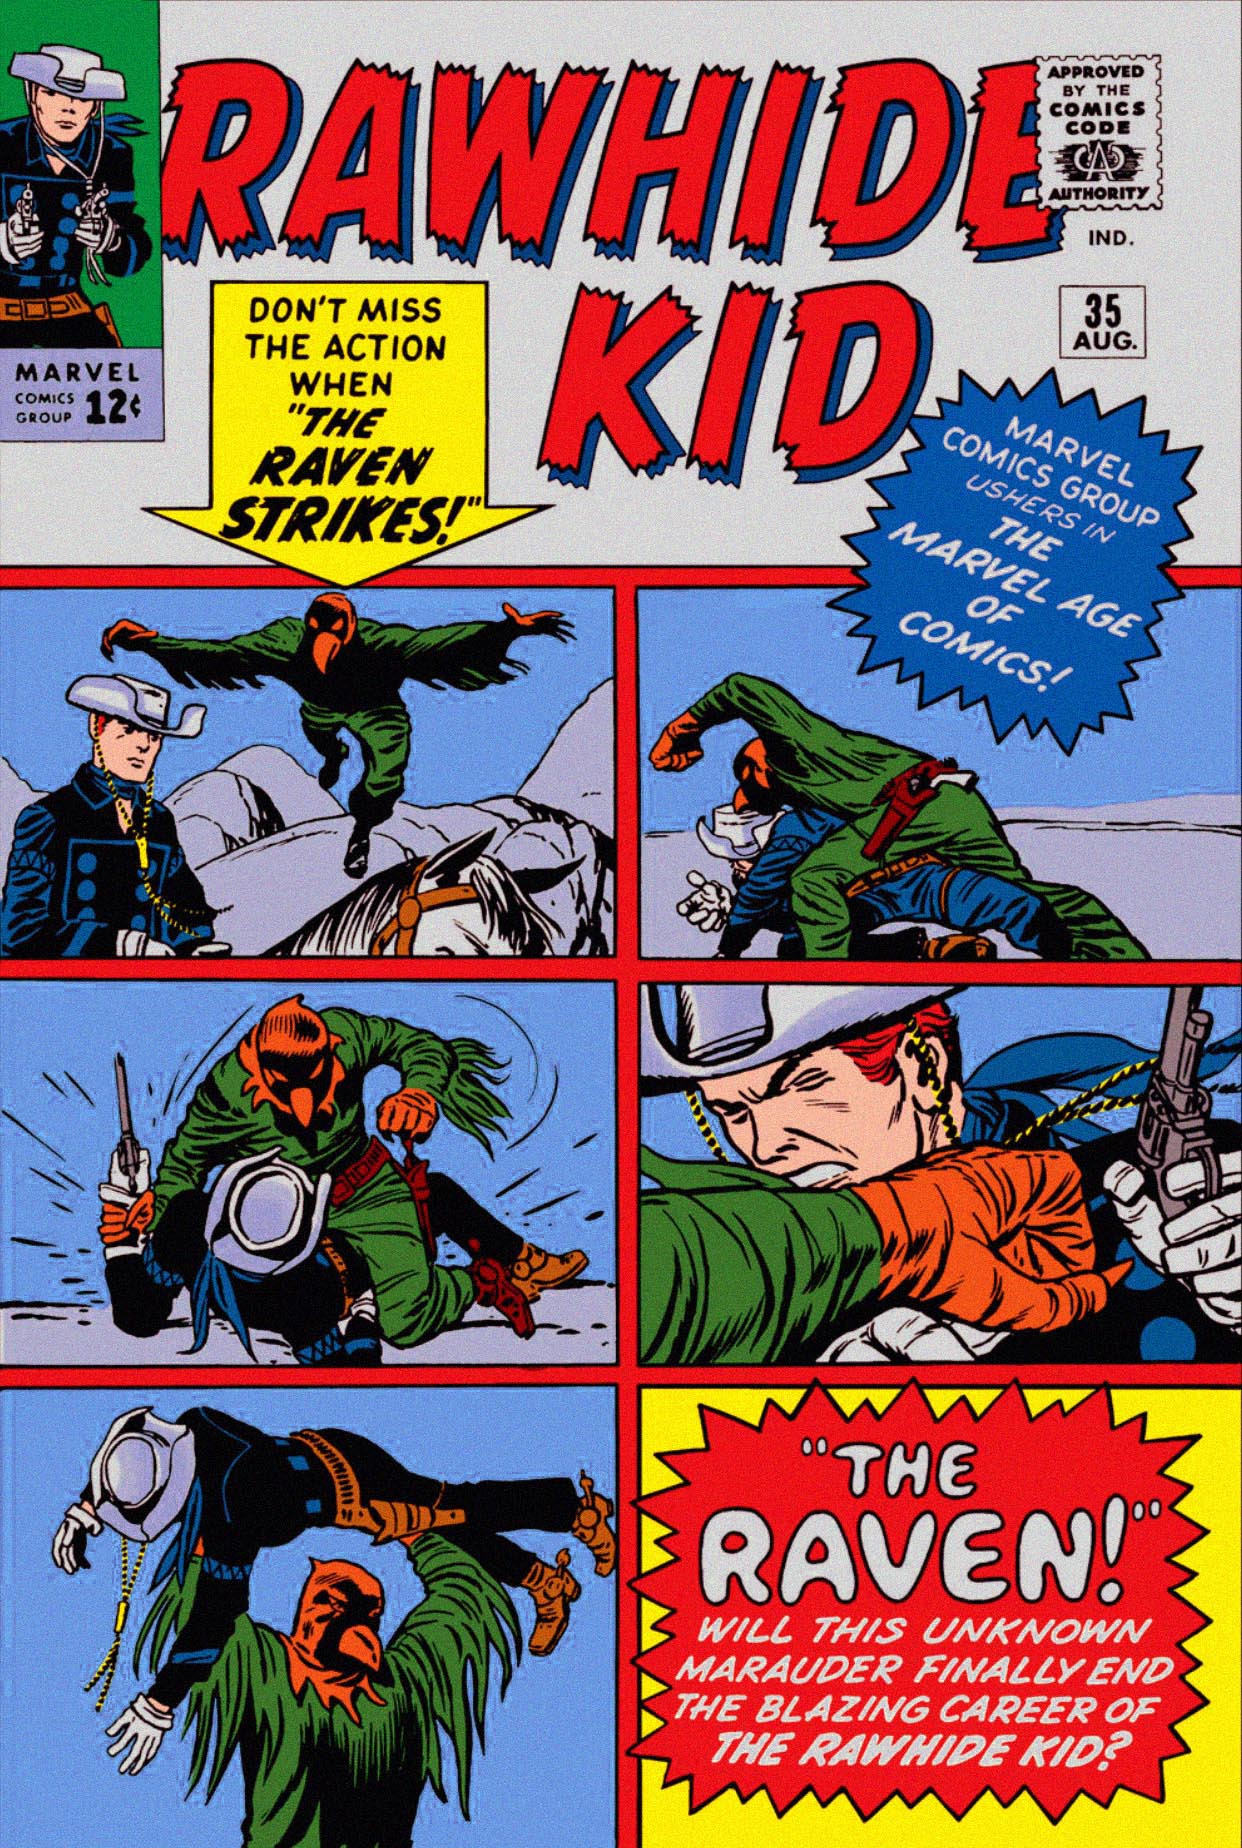 Read online The Rawhide Kid comic -  Issue #35 - 37